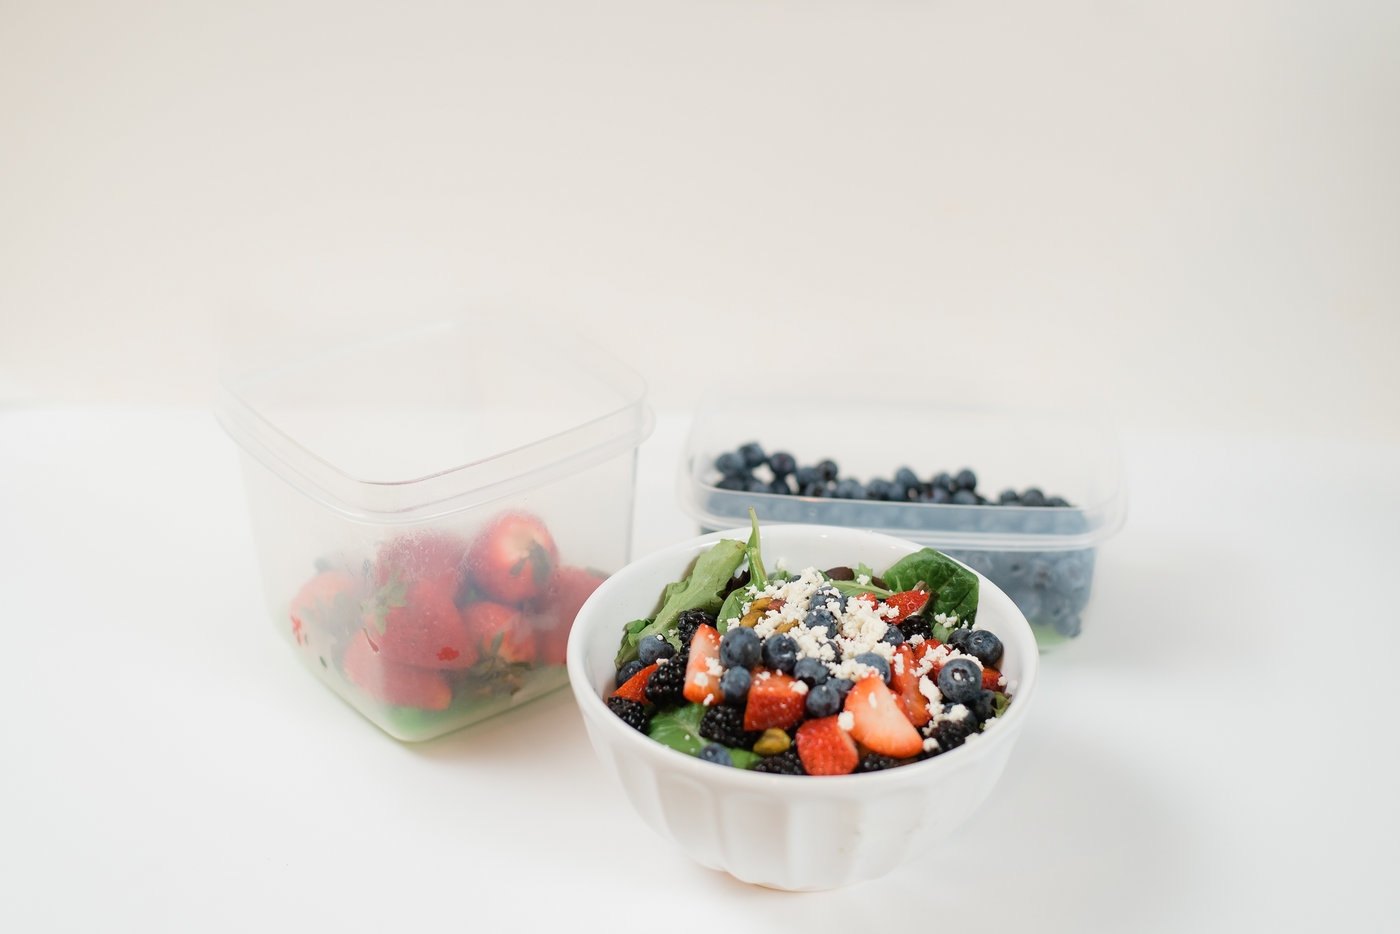 Healthy Berry Salad Recipe by Alabama Health + Food blogger, Heather Brown // My Life Well Loved